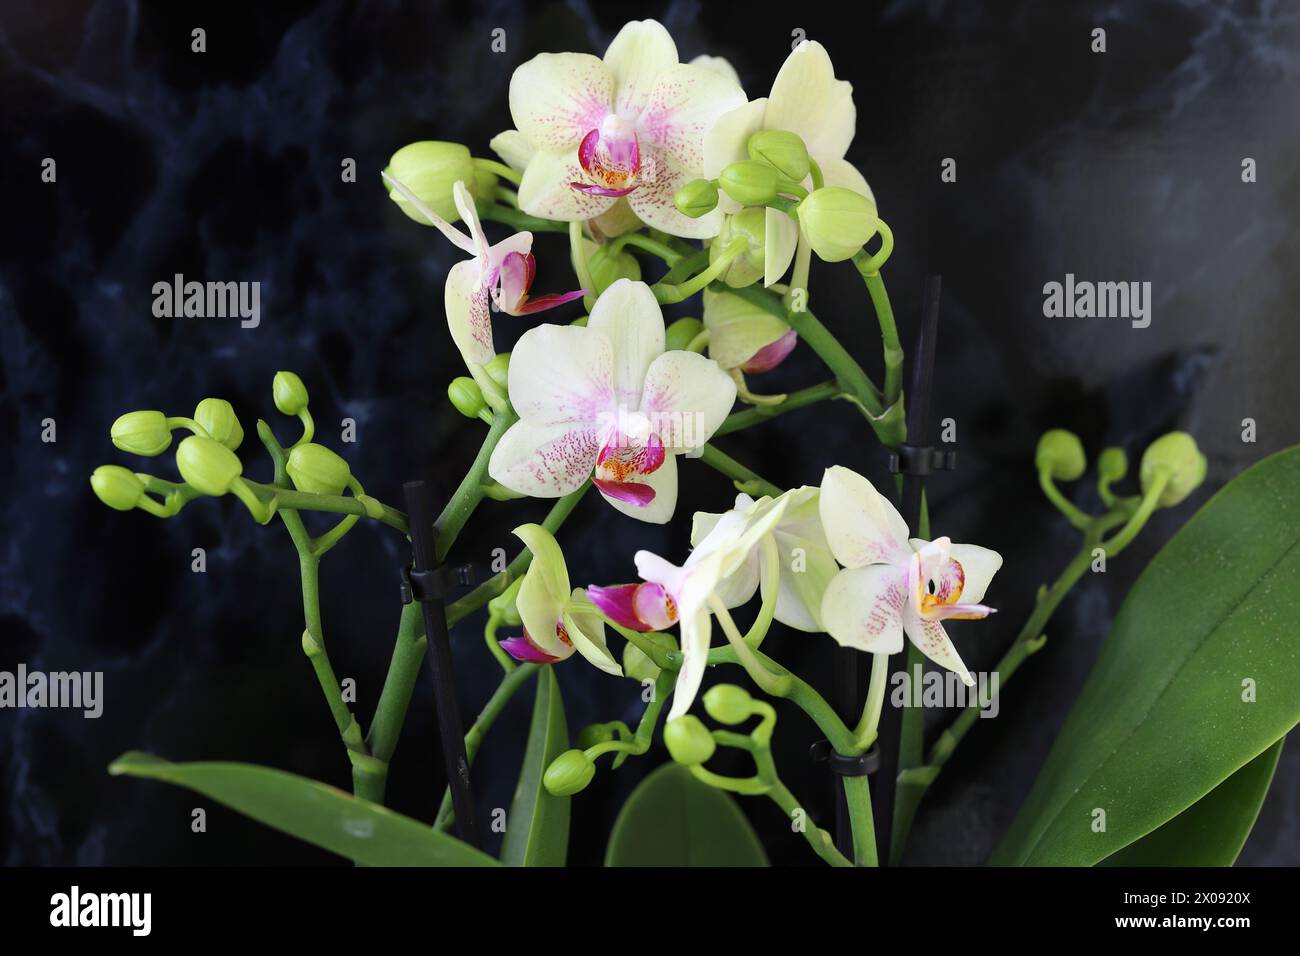 Close-up of a beautiful creamy white Phalenopsis hummingbird orchid with pink pattern against dark background Stock Photo